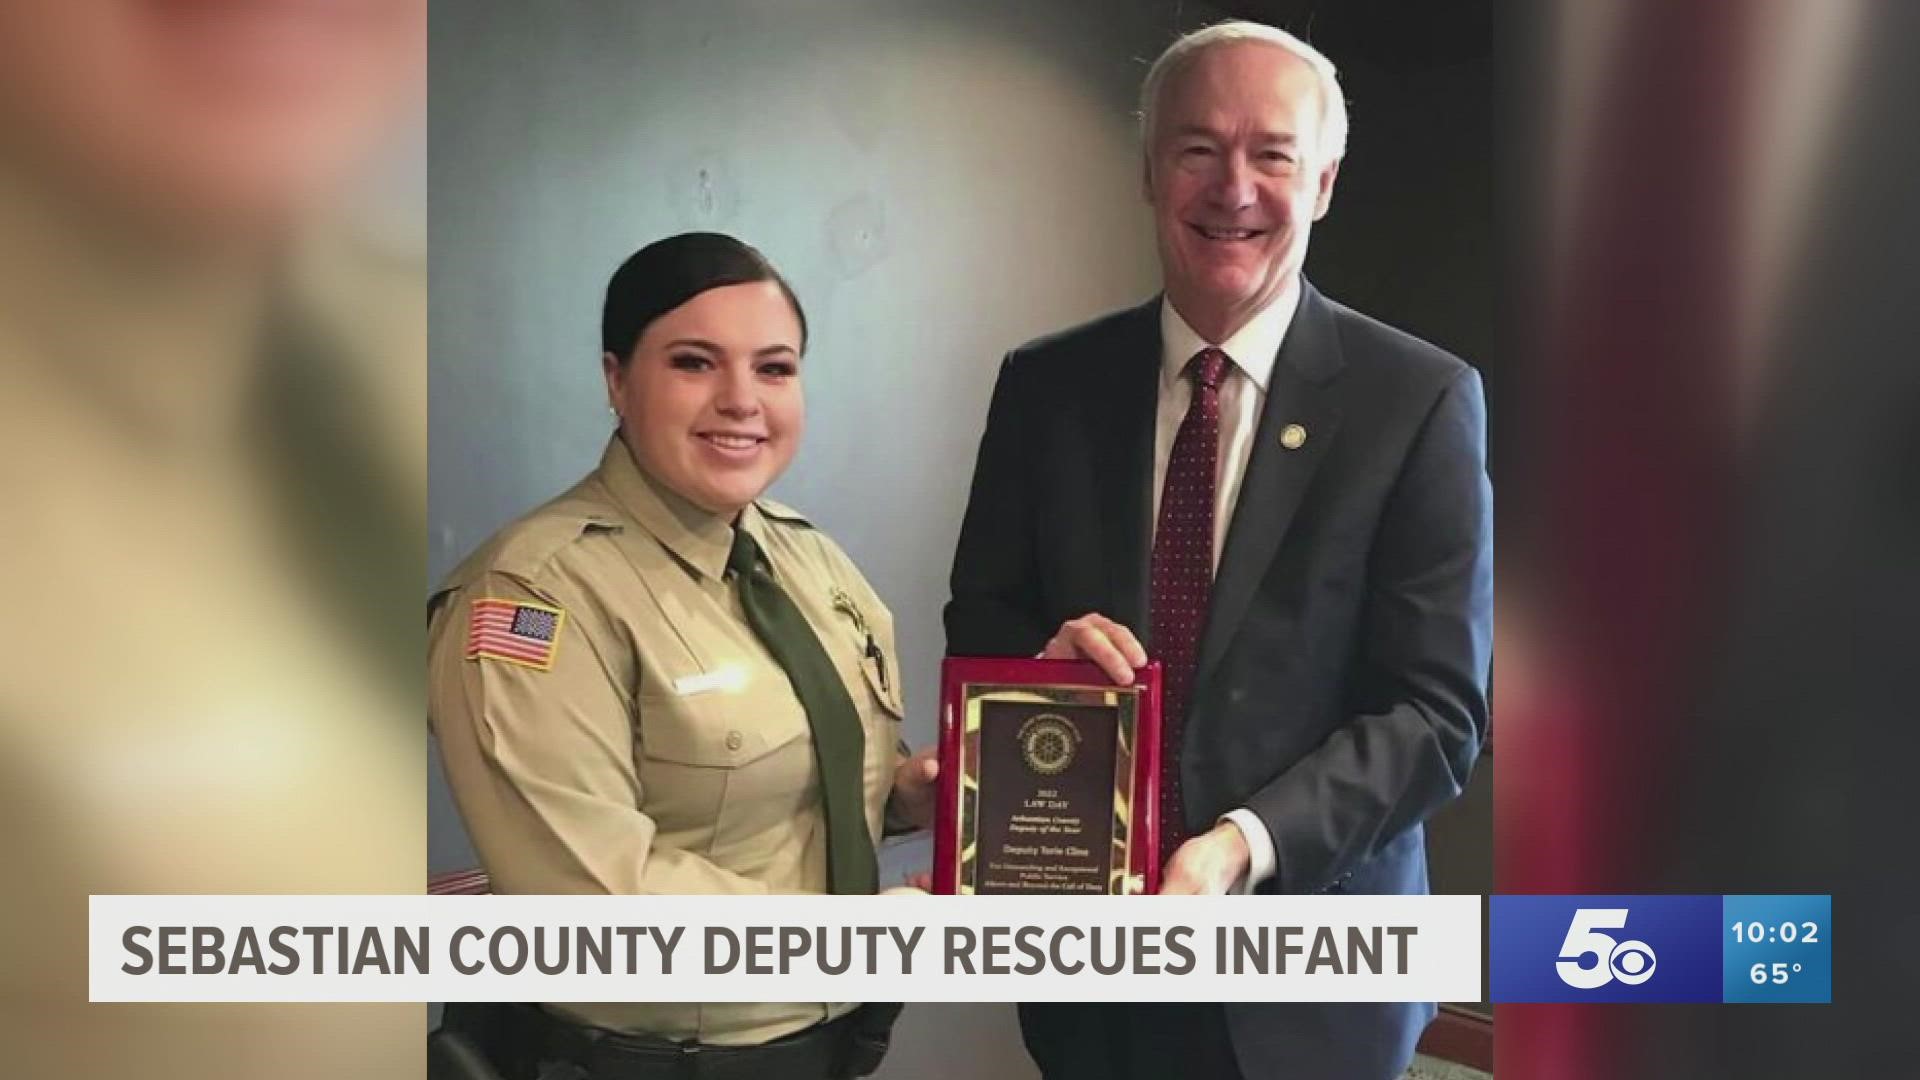 Deputy Tori Cline was honored by Governor Hutchinson for saving an infant who had been choking and unresponsive.